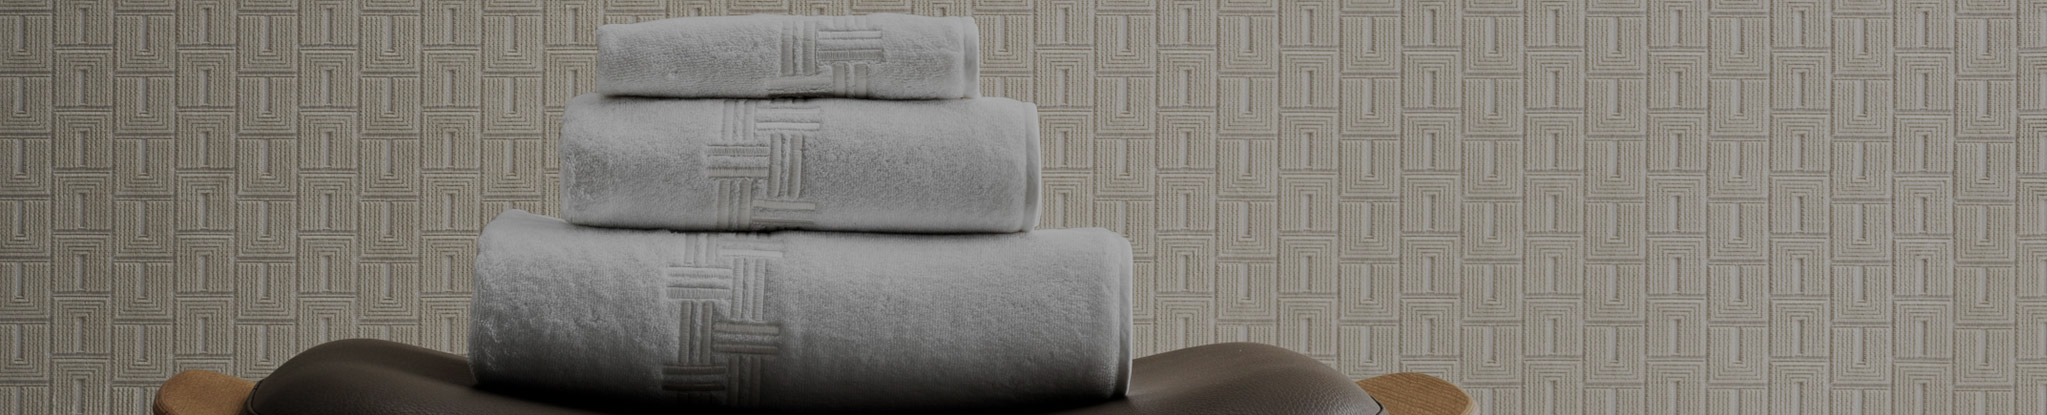 Frette Hotel Collection Towels, Superbly soft and highly absorbent,  Frette's crisp towels are designed…